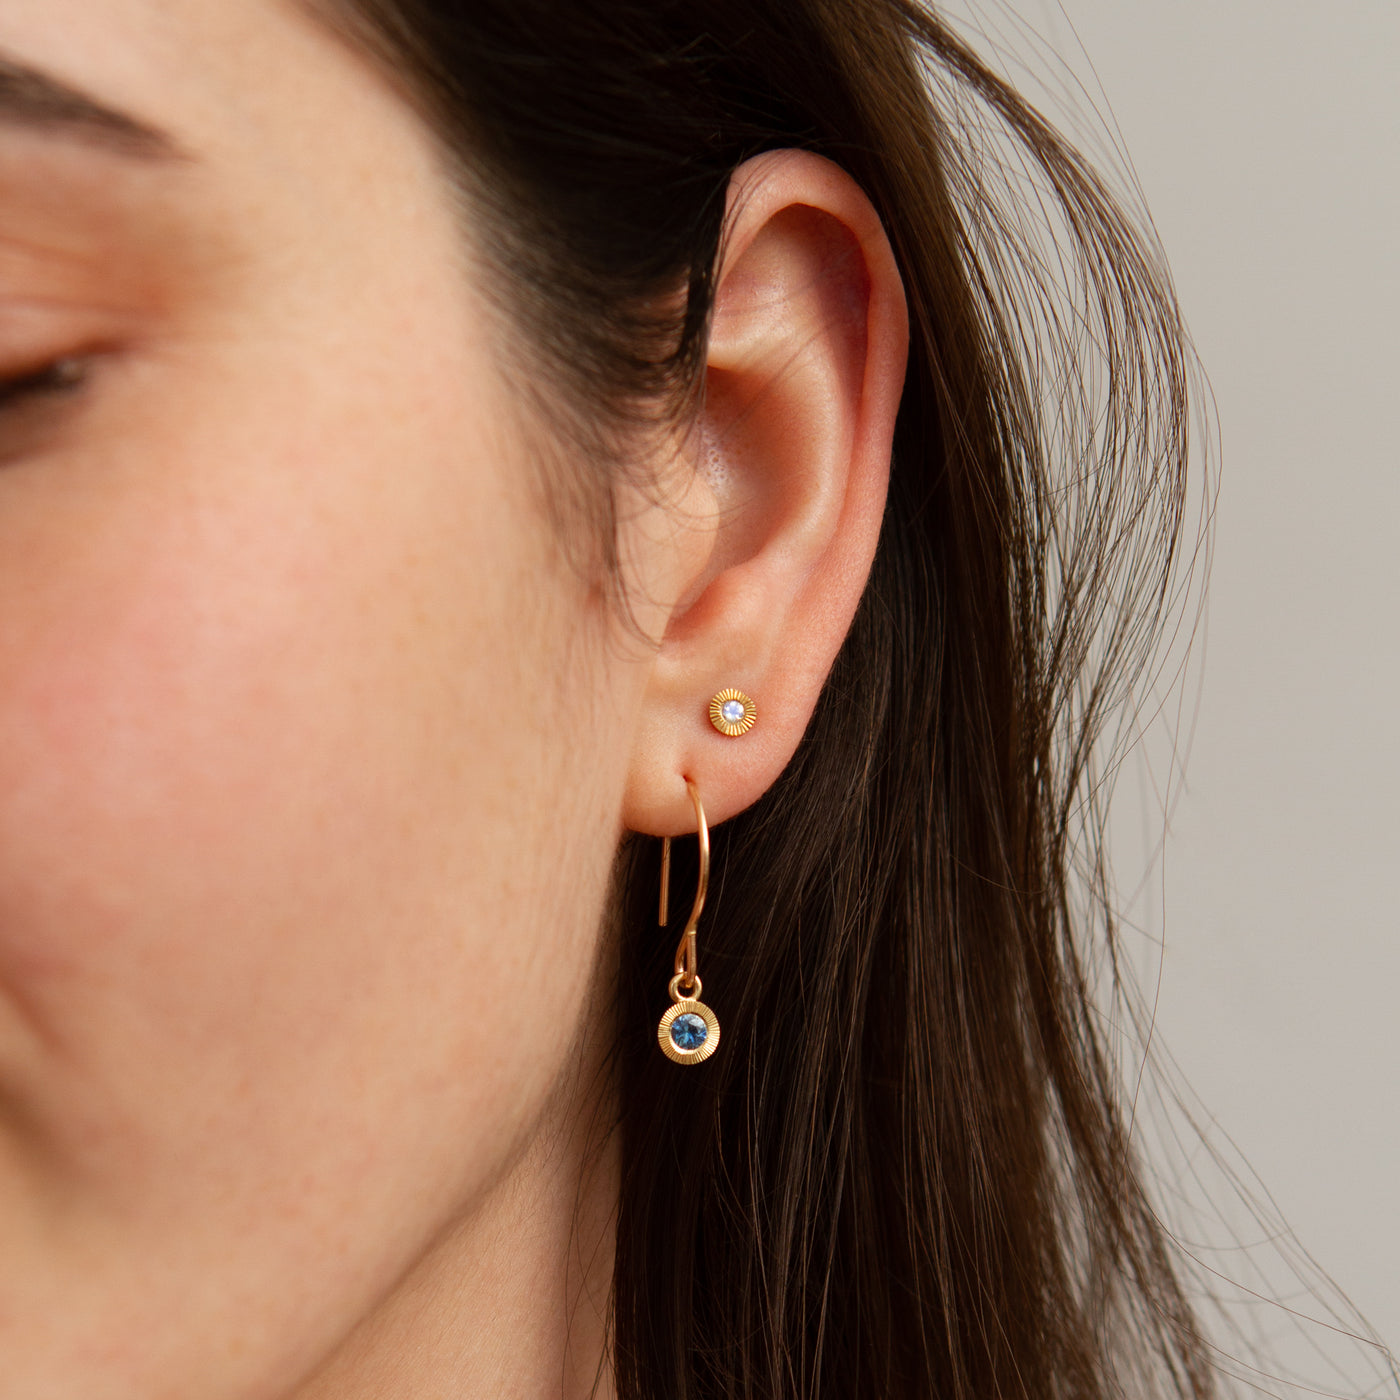 Small Aurora Moonstone Stud Earring in Yellow Gold modeled on an ear